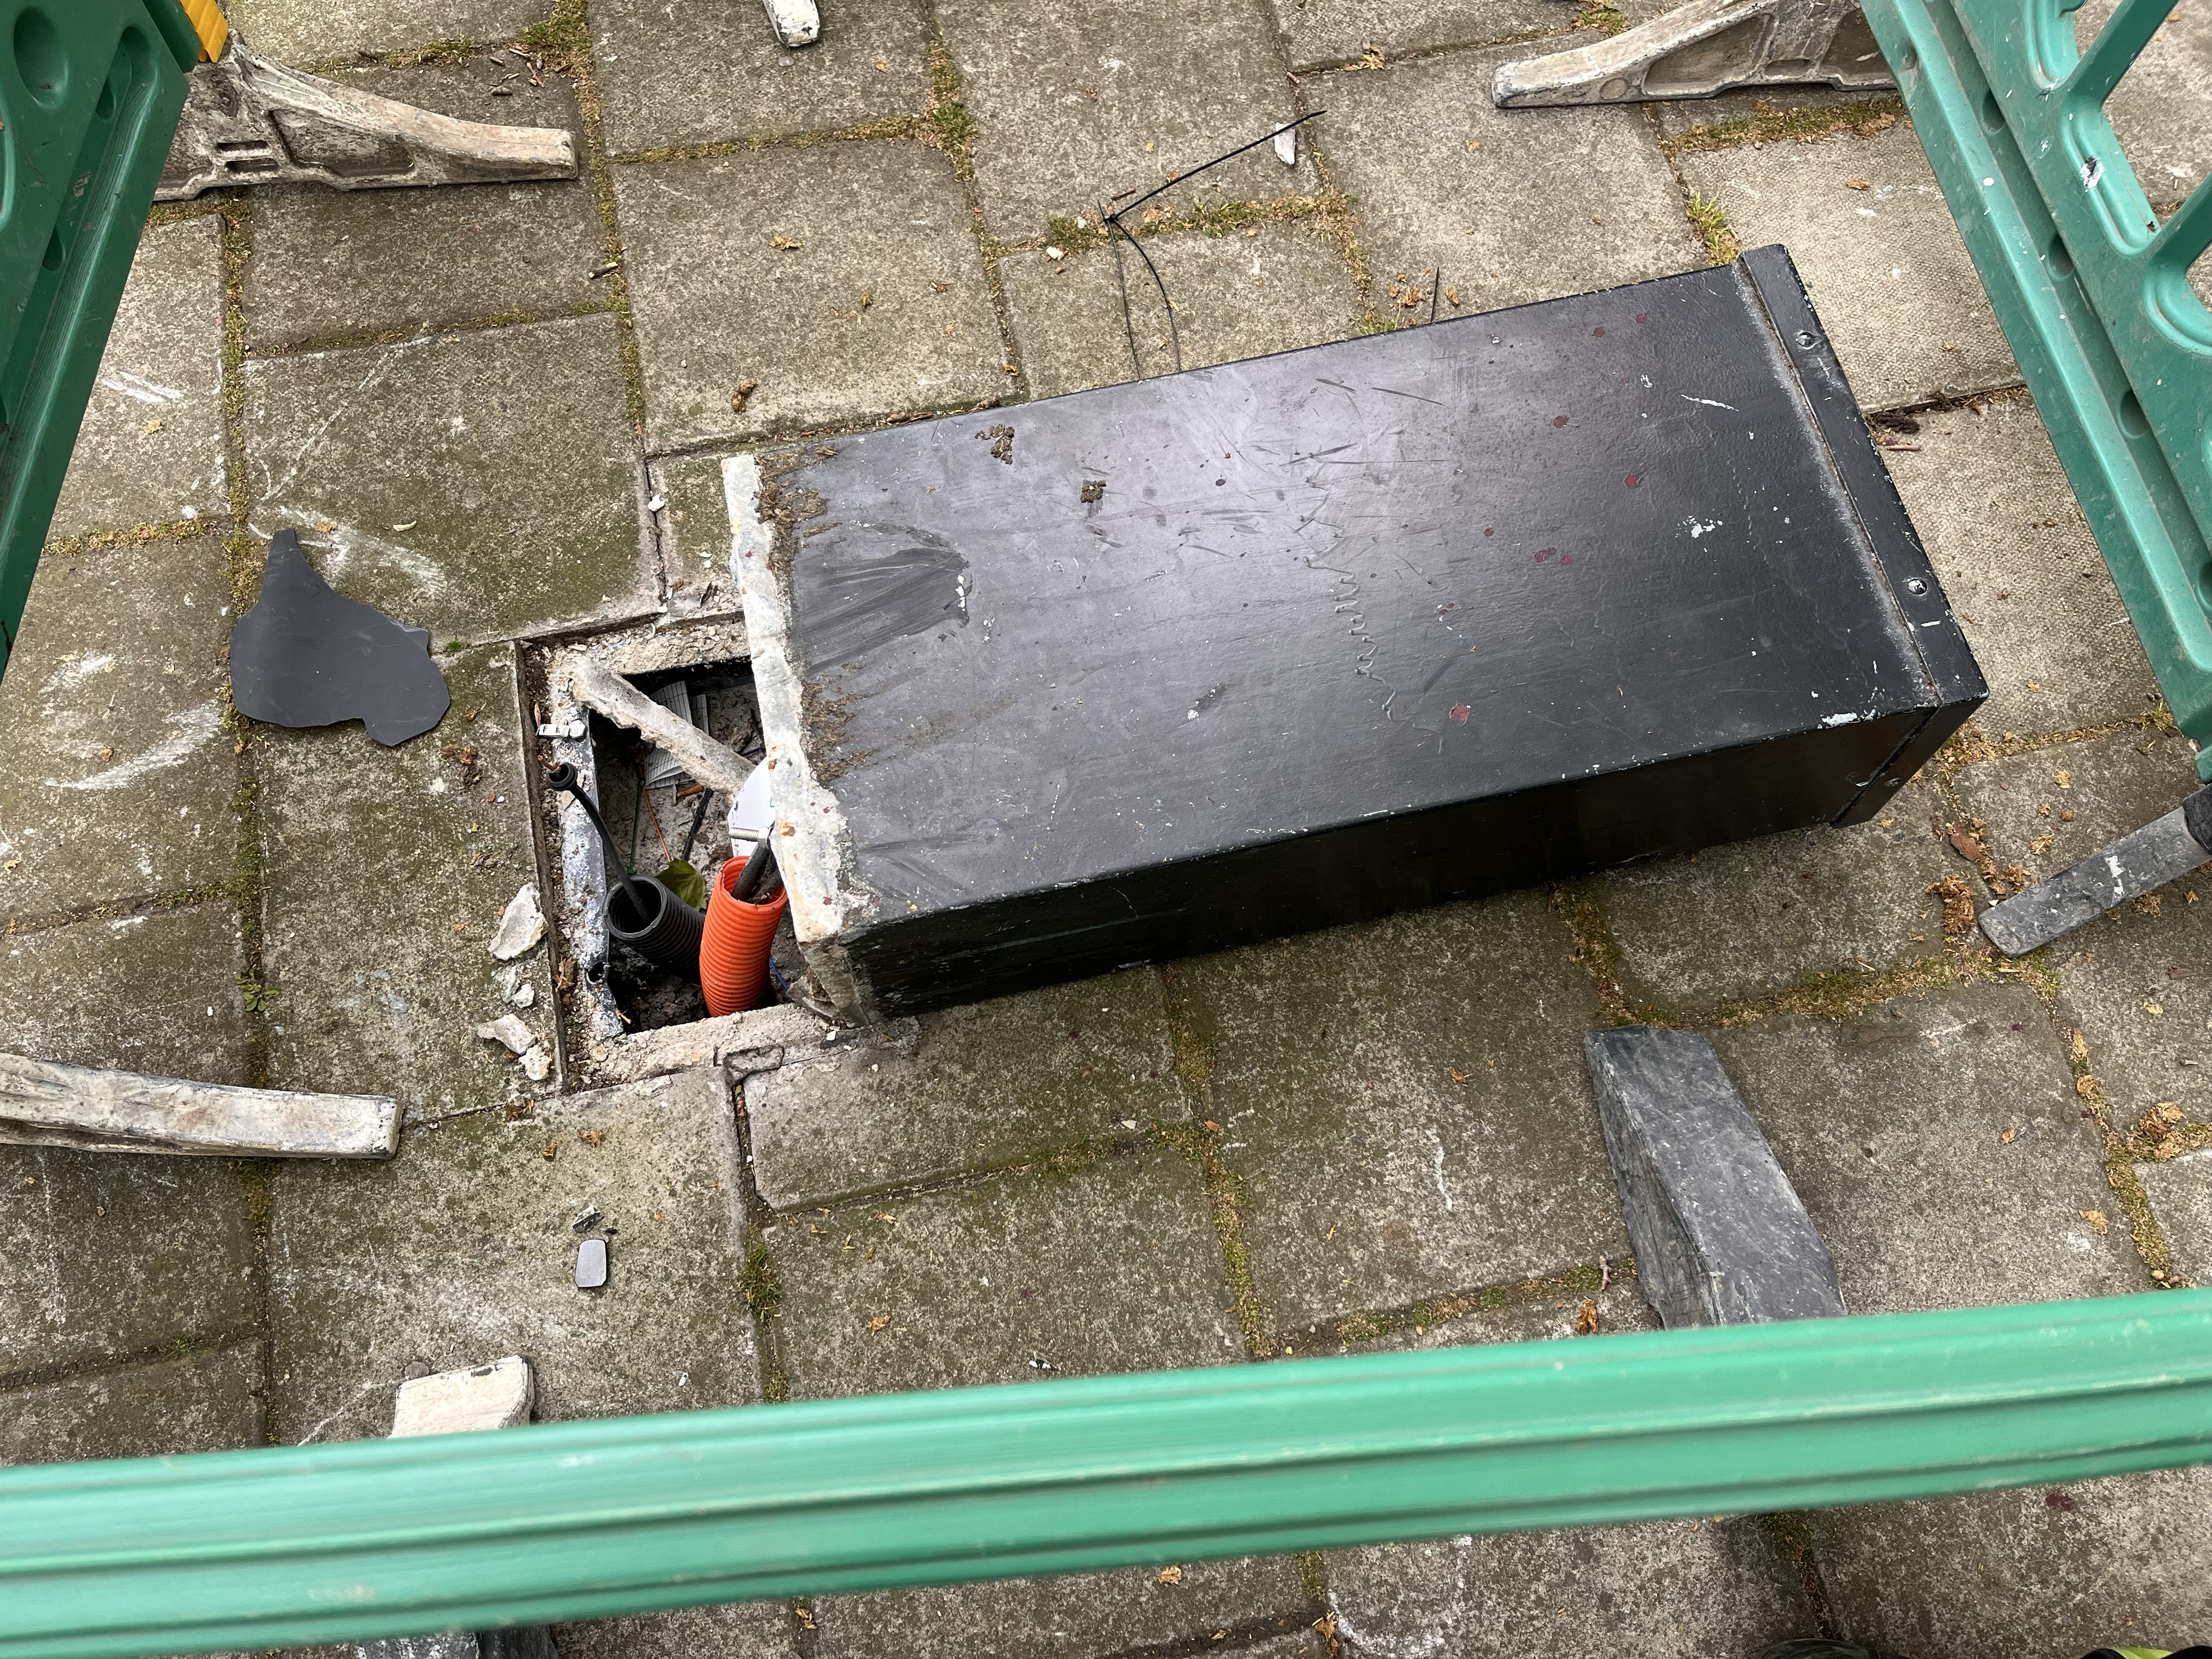 The horses ploughed through an electricity box in Belgrave Square